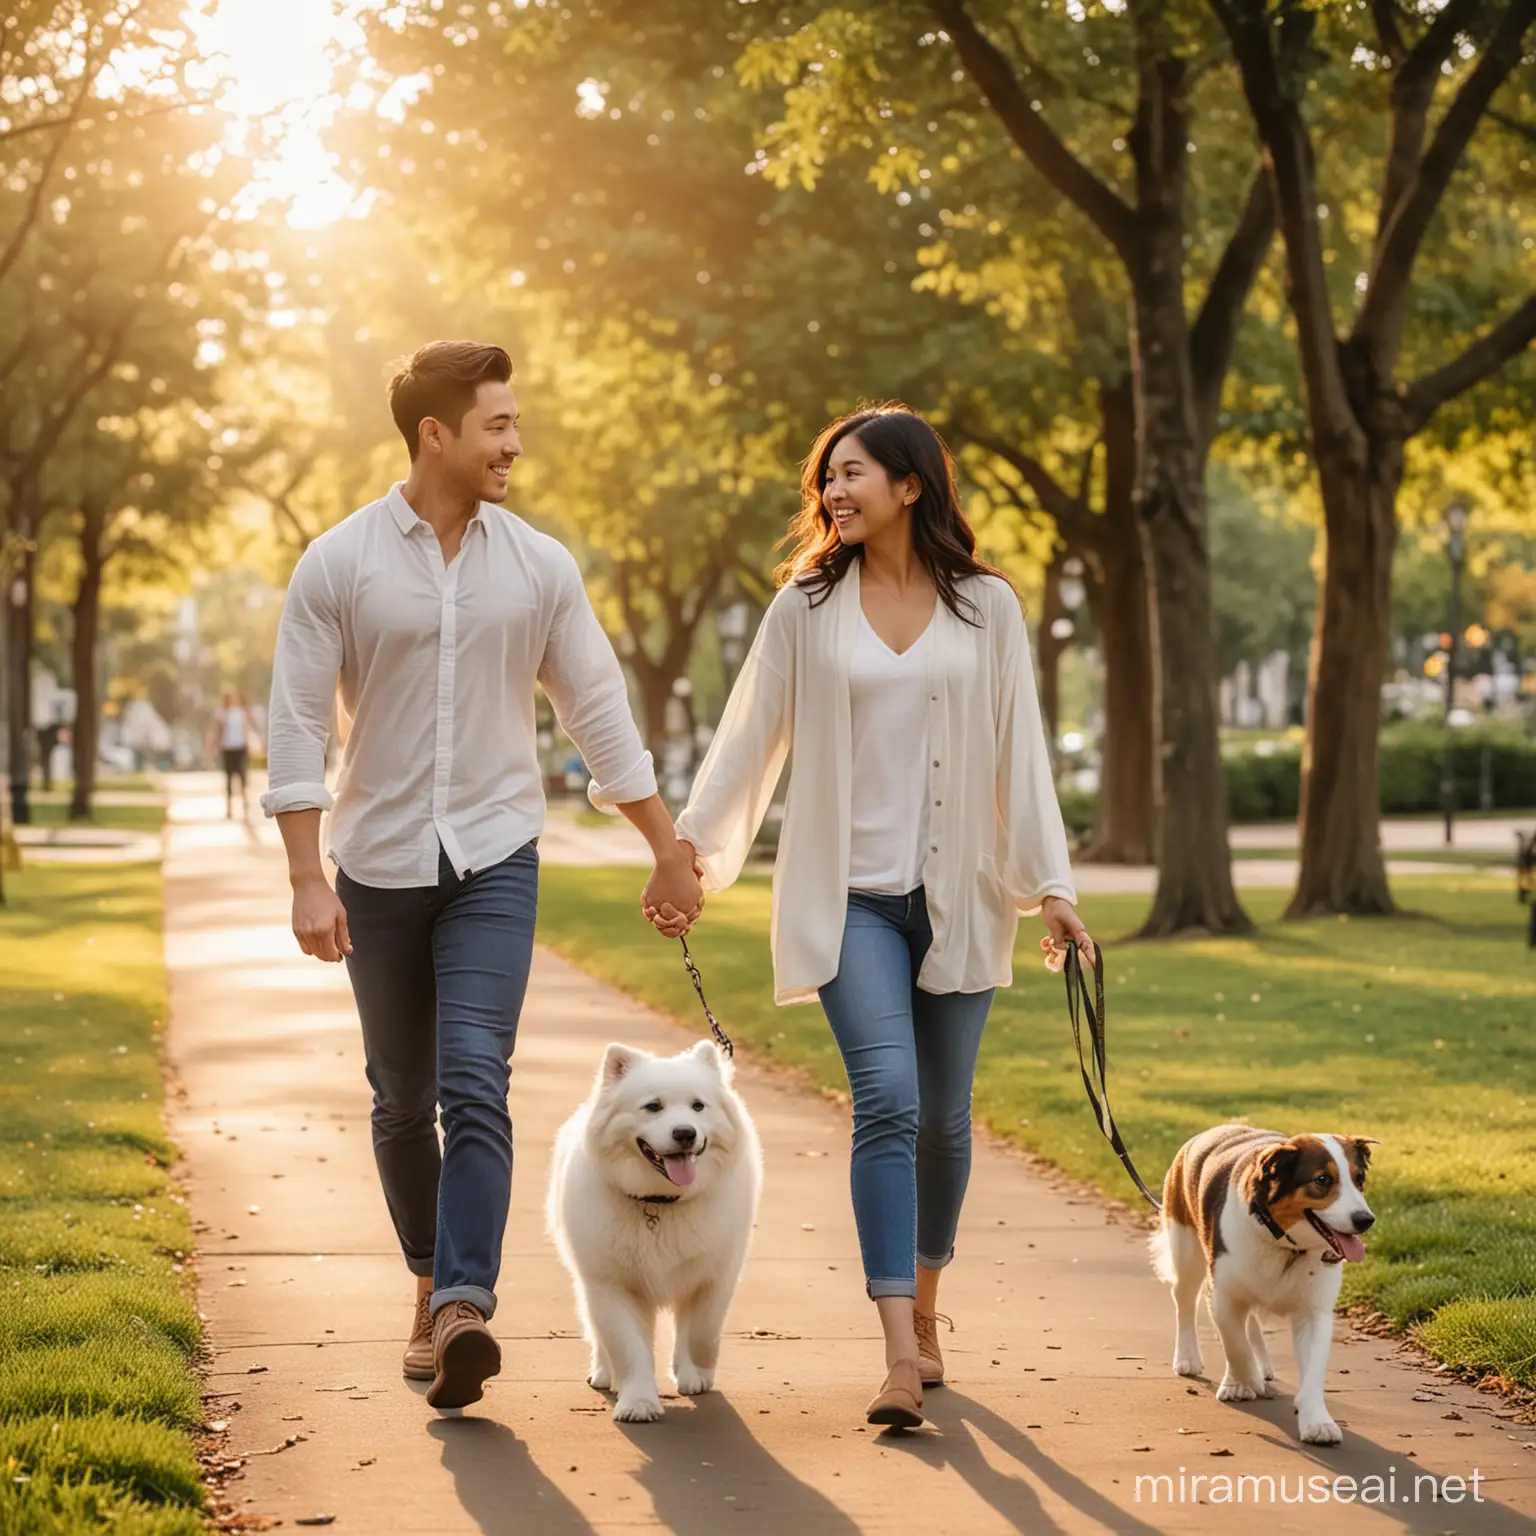 Multicultural Couple Walking with Dog in Golden Hour Park